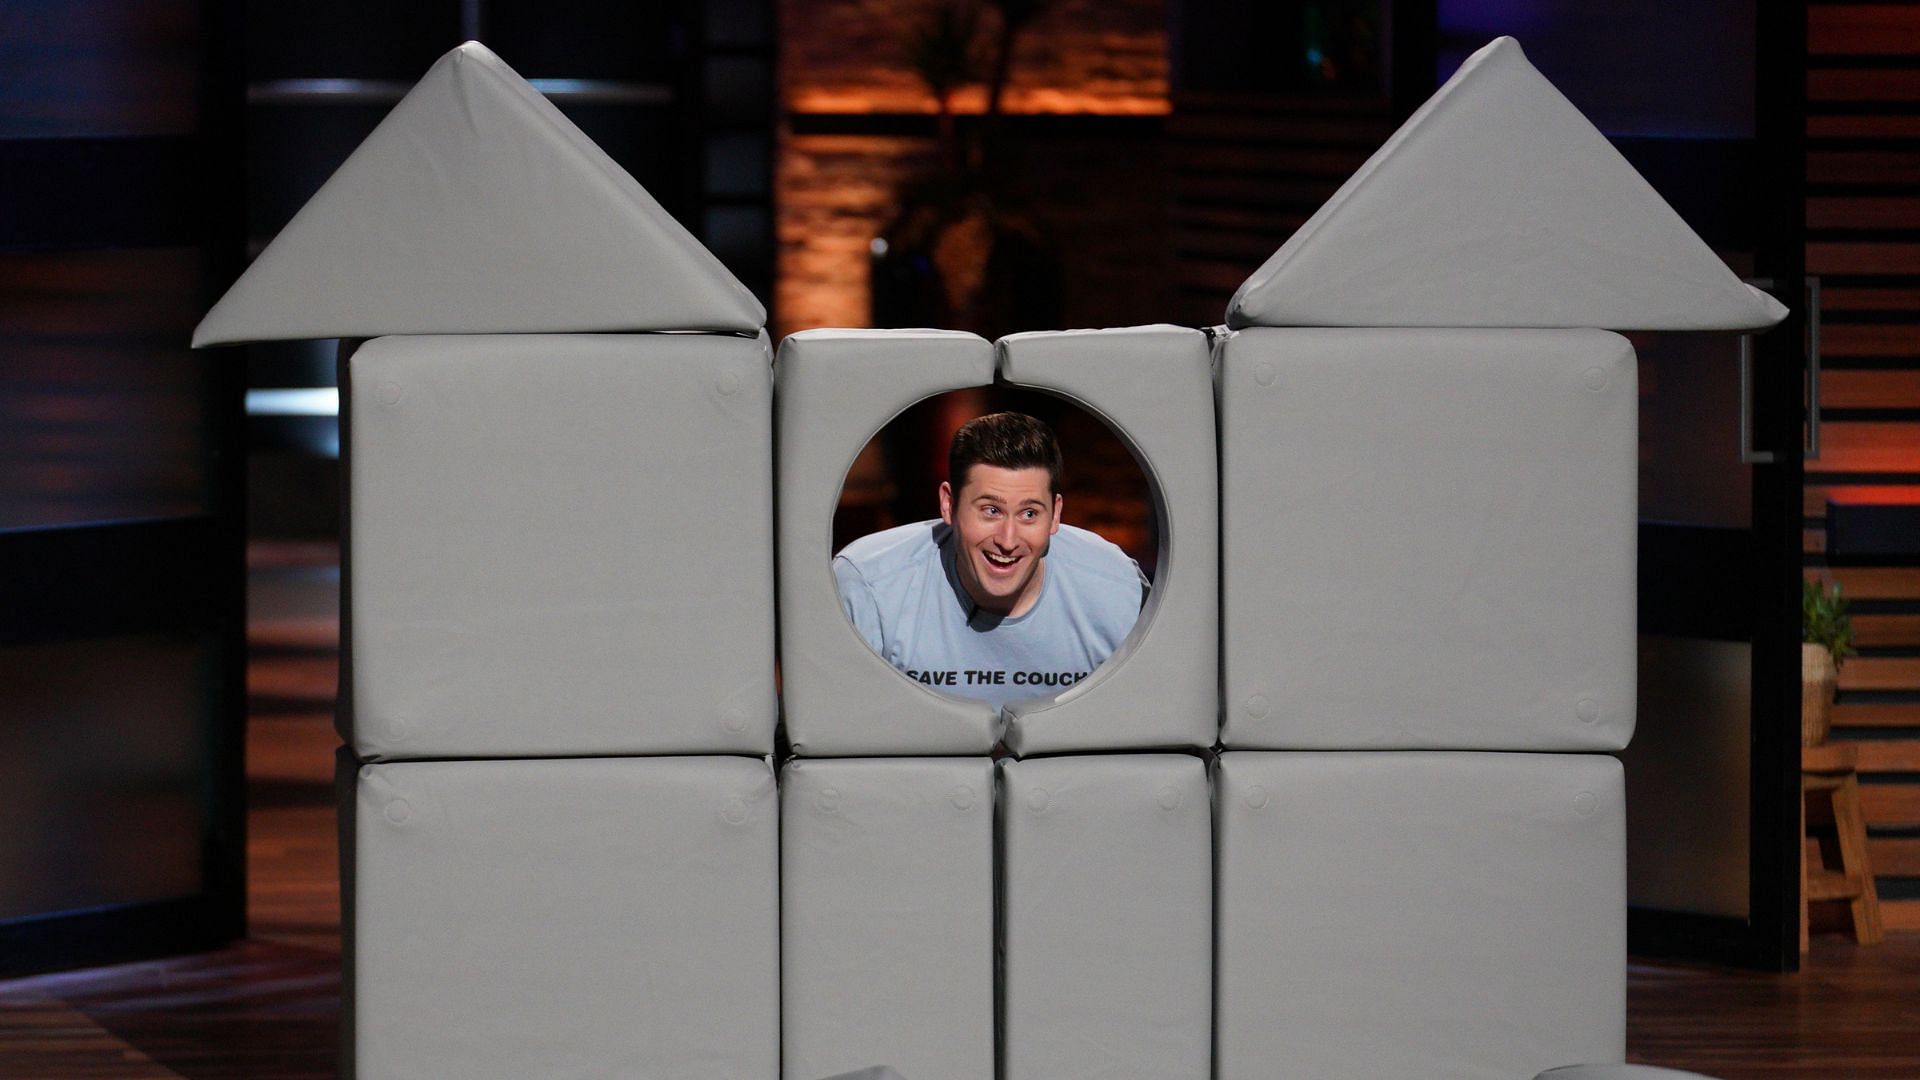 Fort founder Conor Lewis pitches his business on Shark Tank (Image via Christopher Willard/ABC)